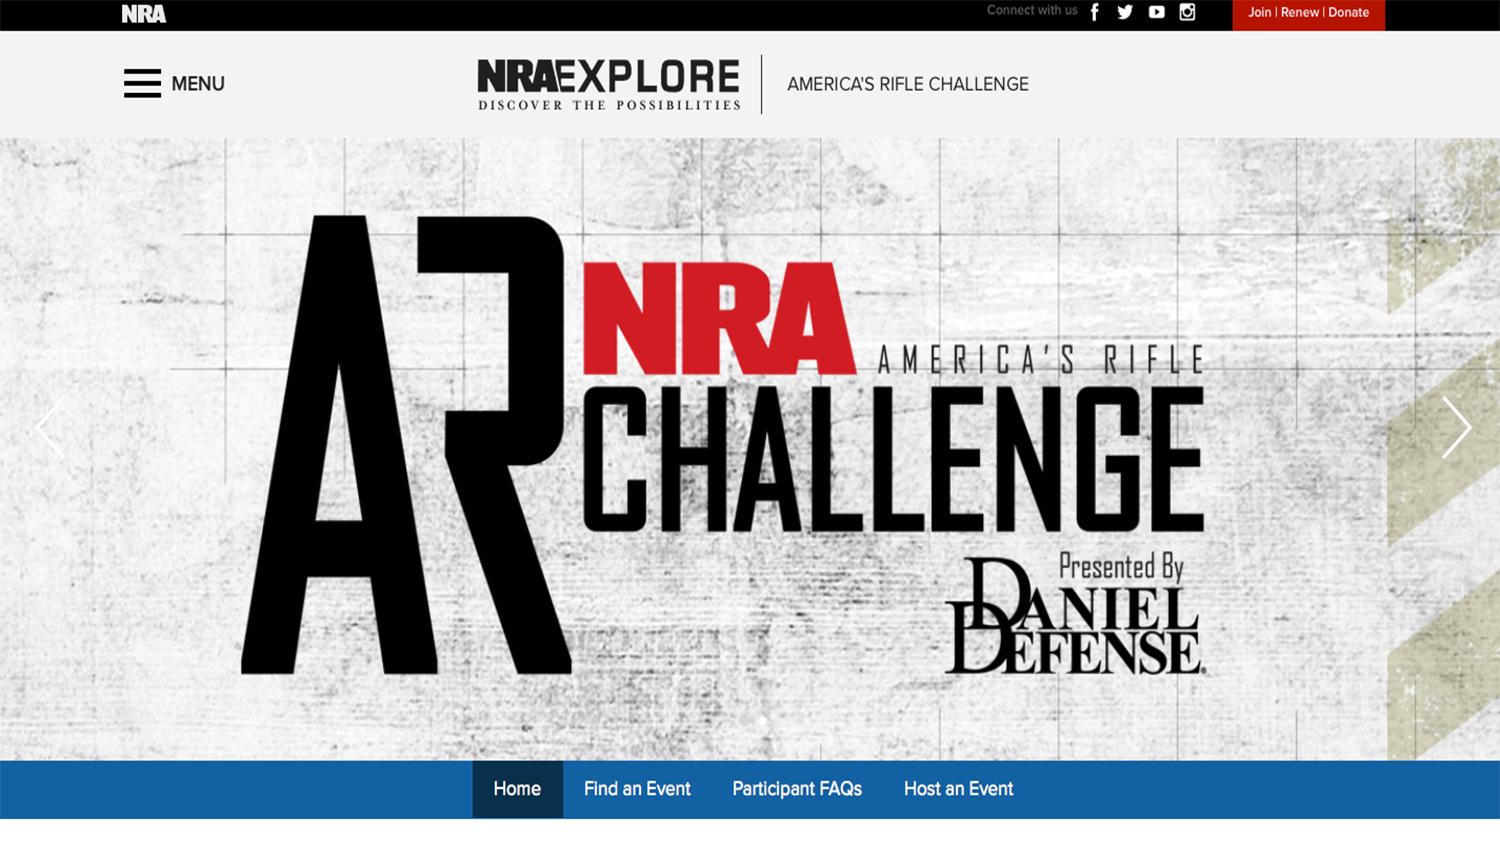 5 Things You'll Notice About the America's Rifle Challenge Website...